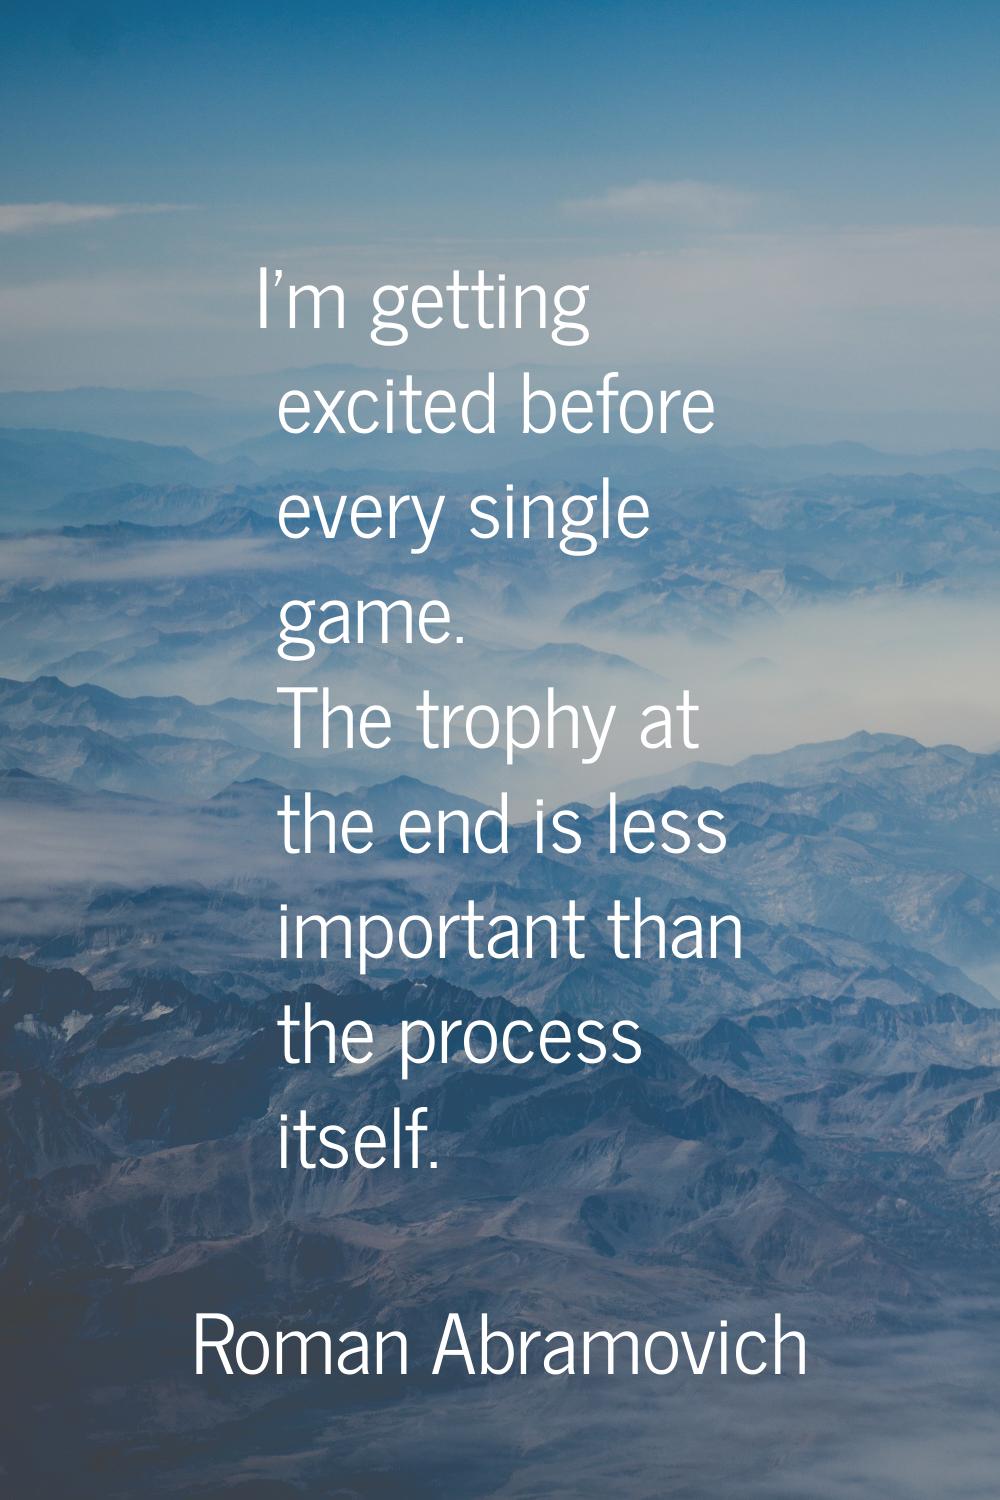 I'm getting excited before every single game. The trophy at the end is less important than the proc